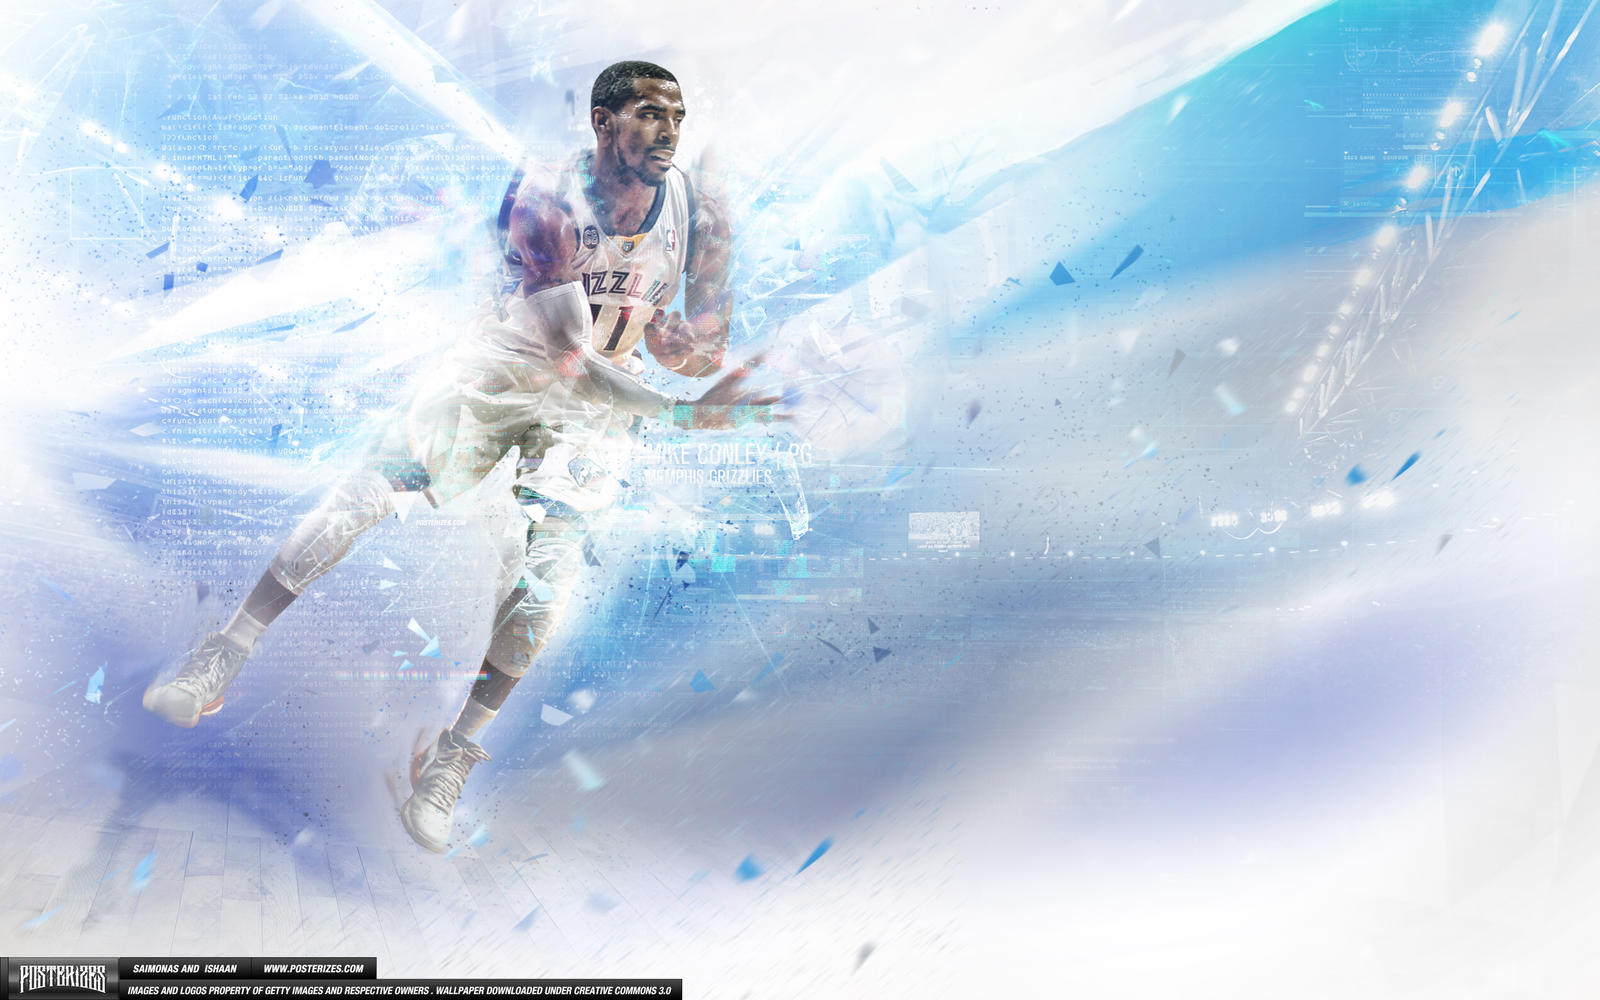 Mike Conley Wallpapers